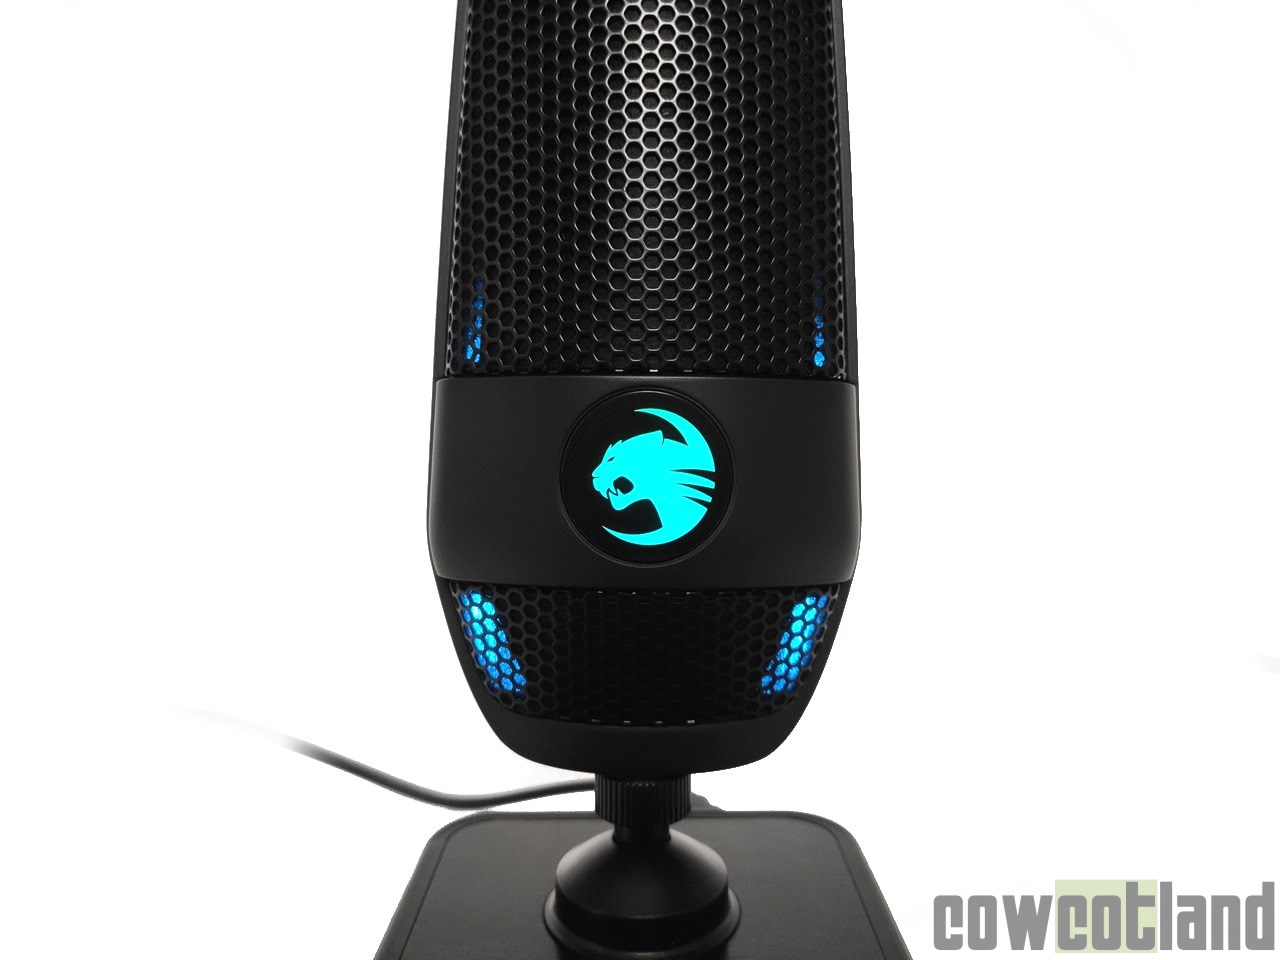 Image 45867, galerie Test micro ROCCAT Torch : ROCCAT se lance dans le micro gaming et streaming 